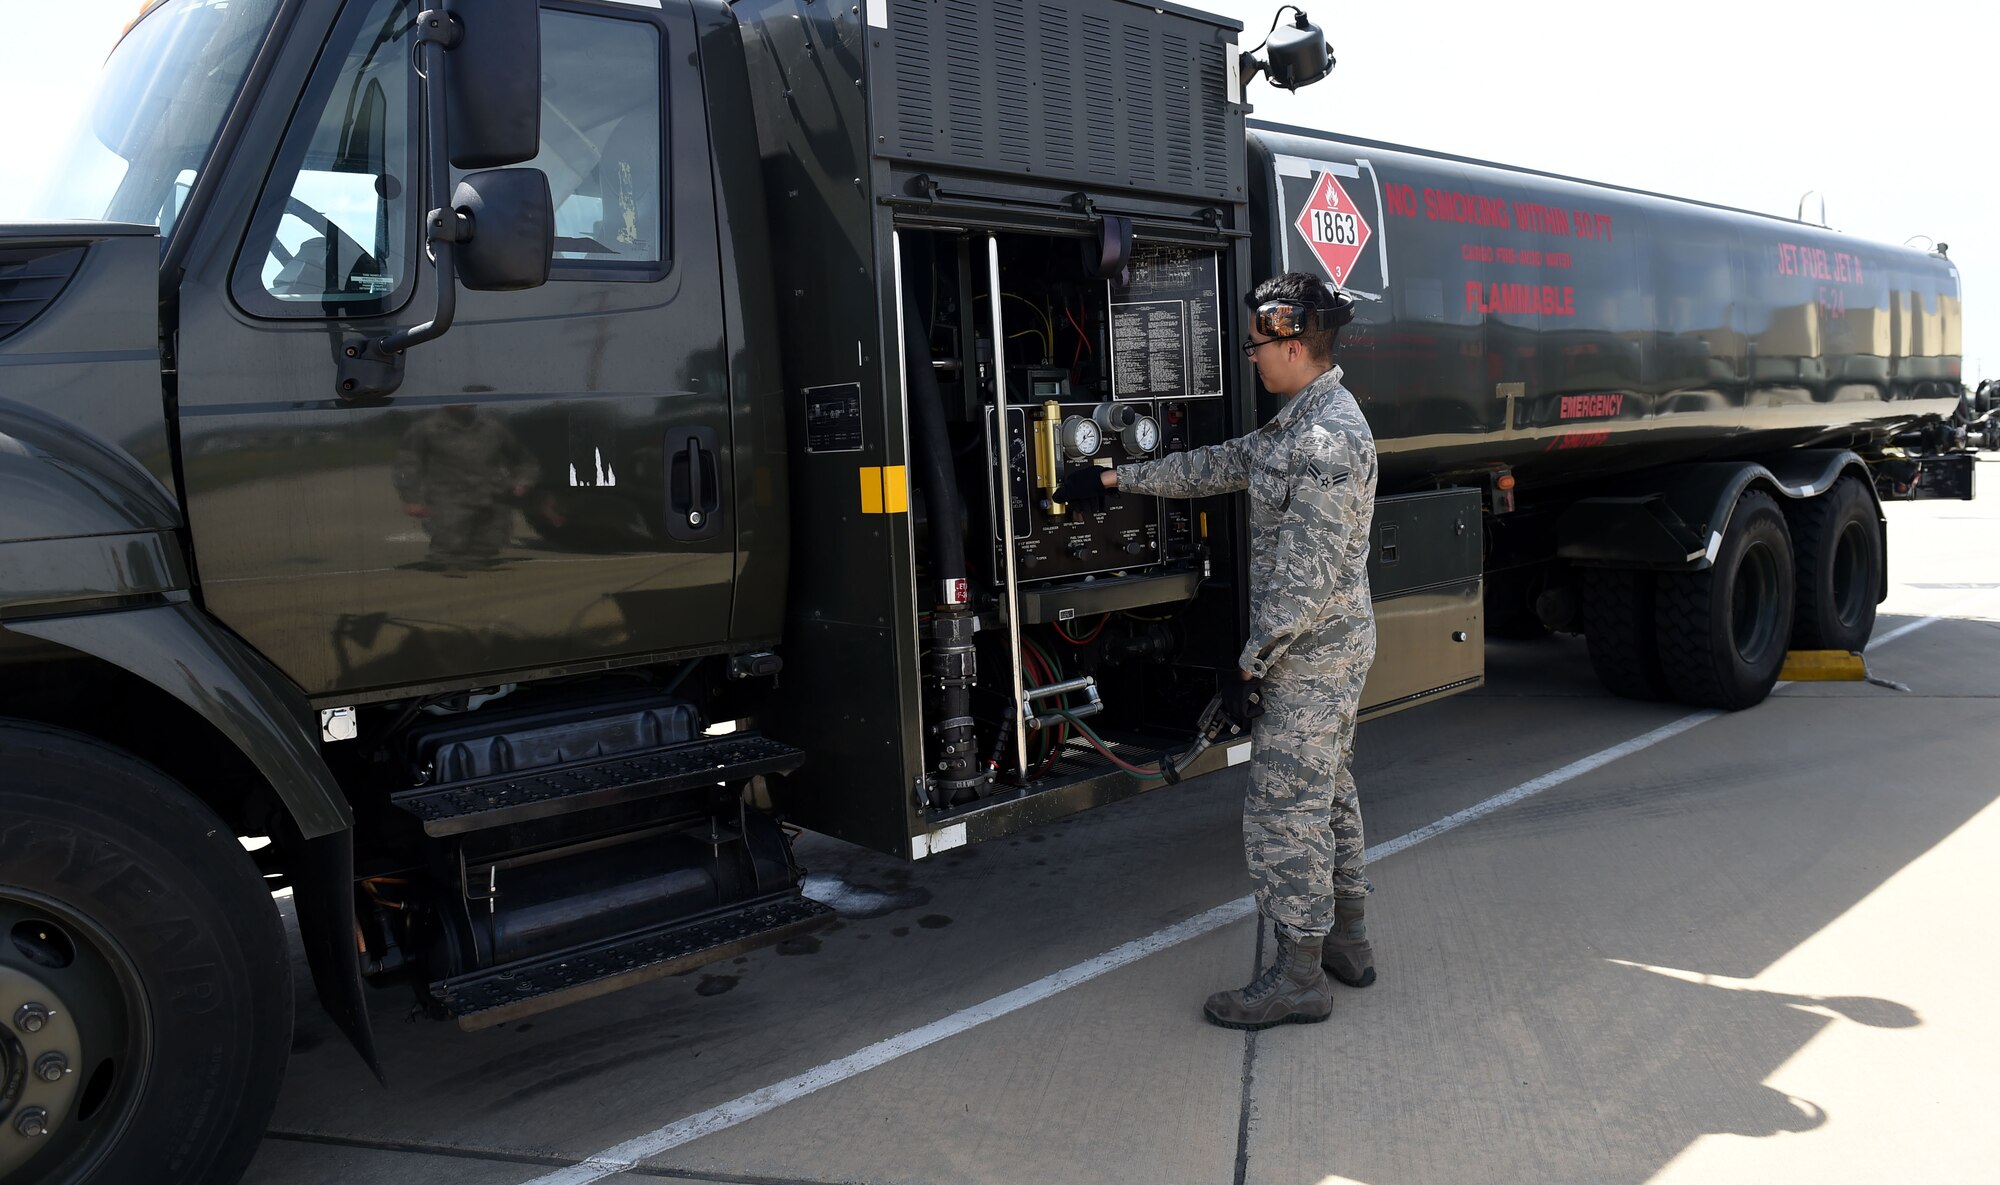 Airman 1st Class Kevin Molina, 627th Logistics Readiness Squadron fuels technician, adjusts the control panel on a fuel truck on March Air Reserve Base in California, March 1, 2019.